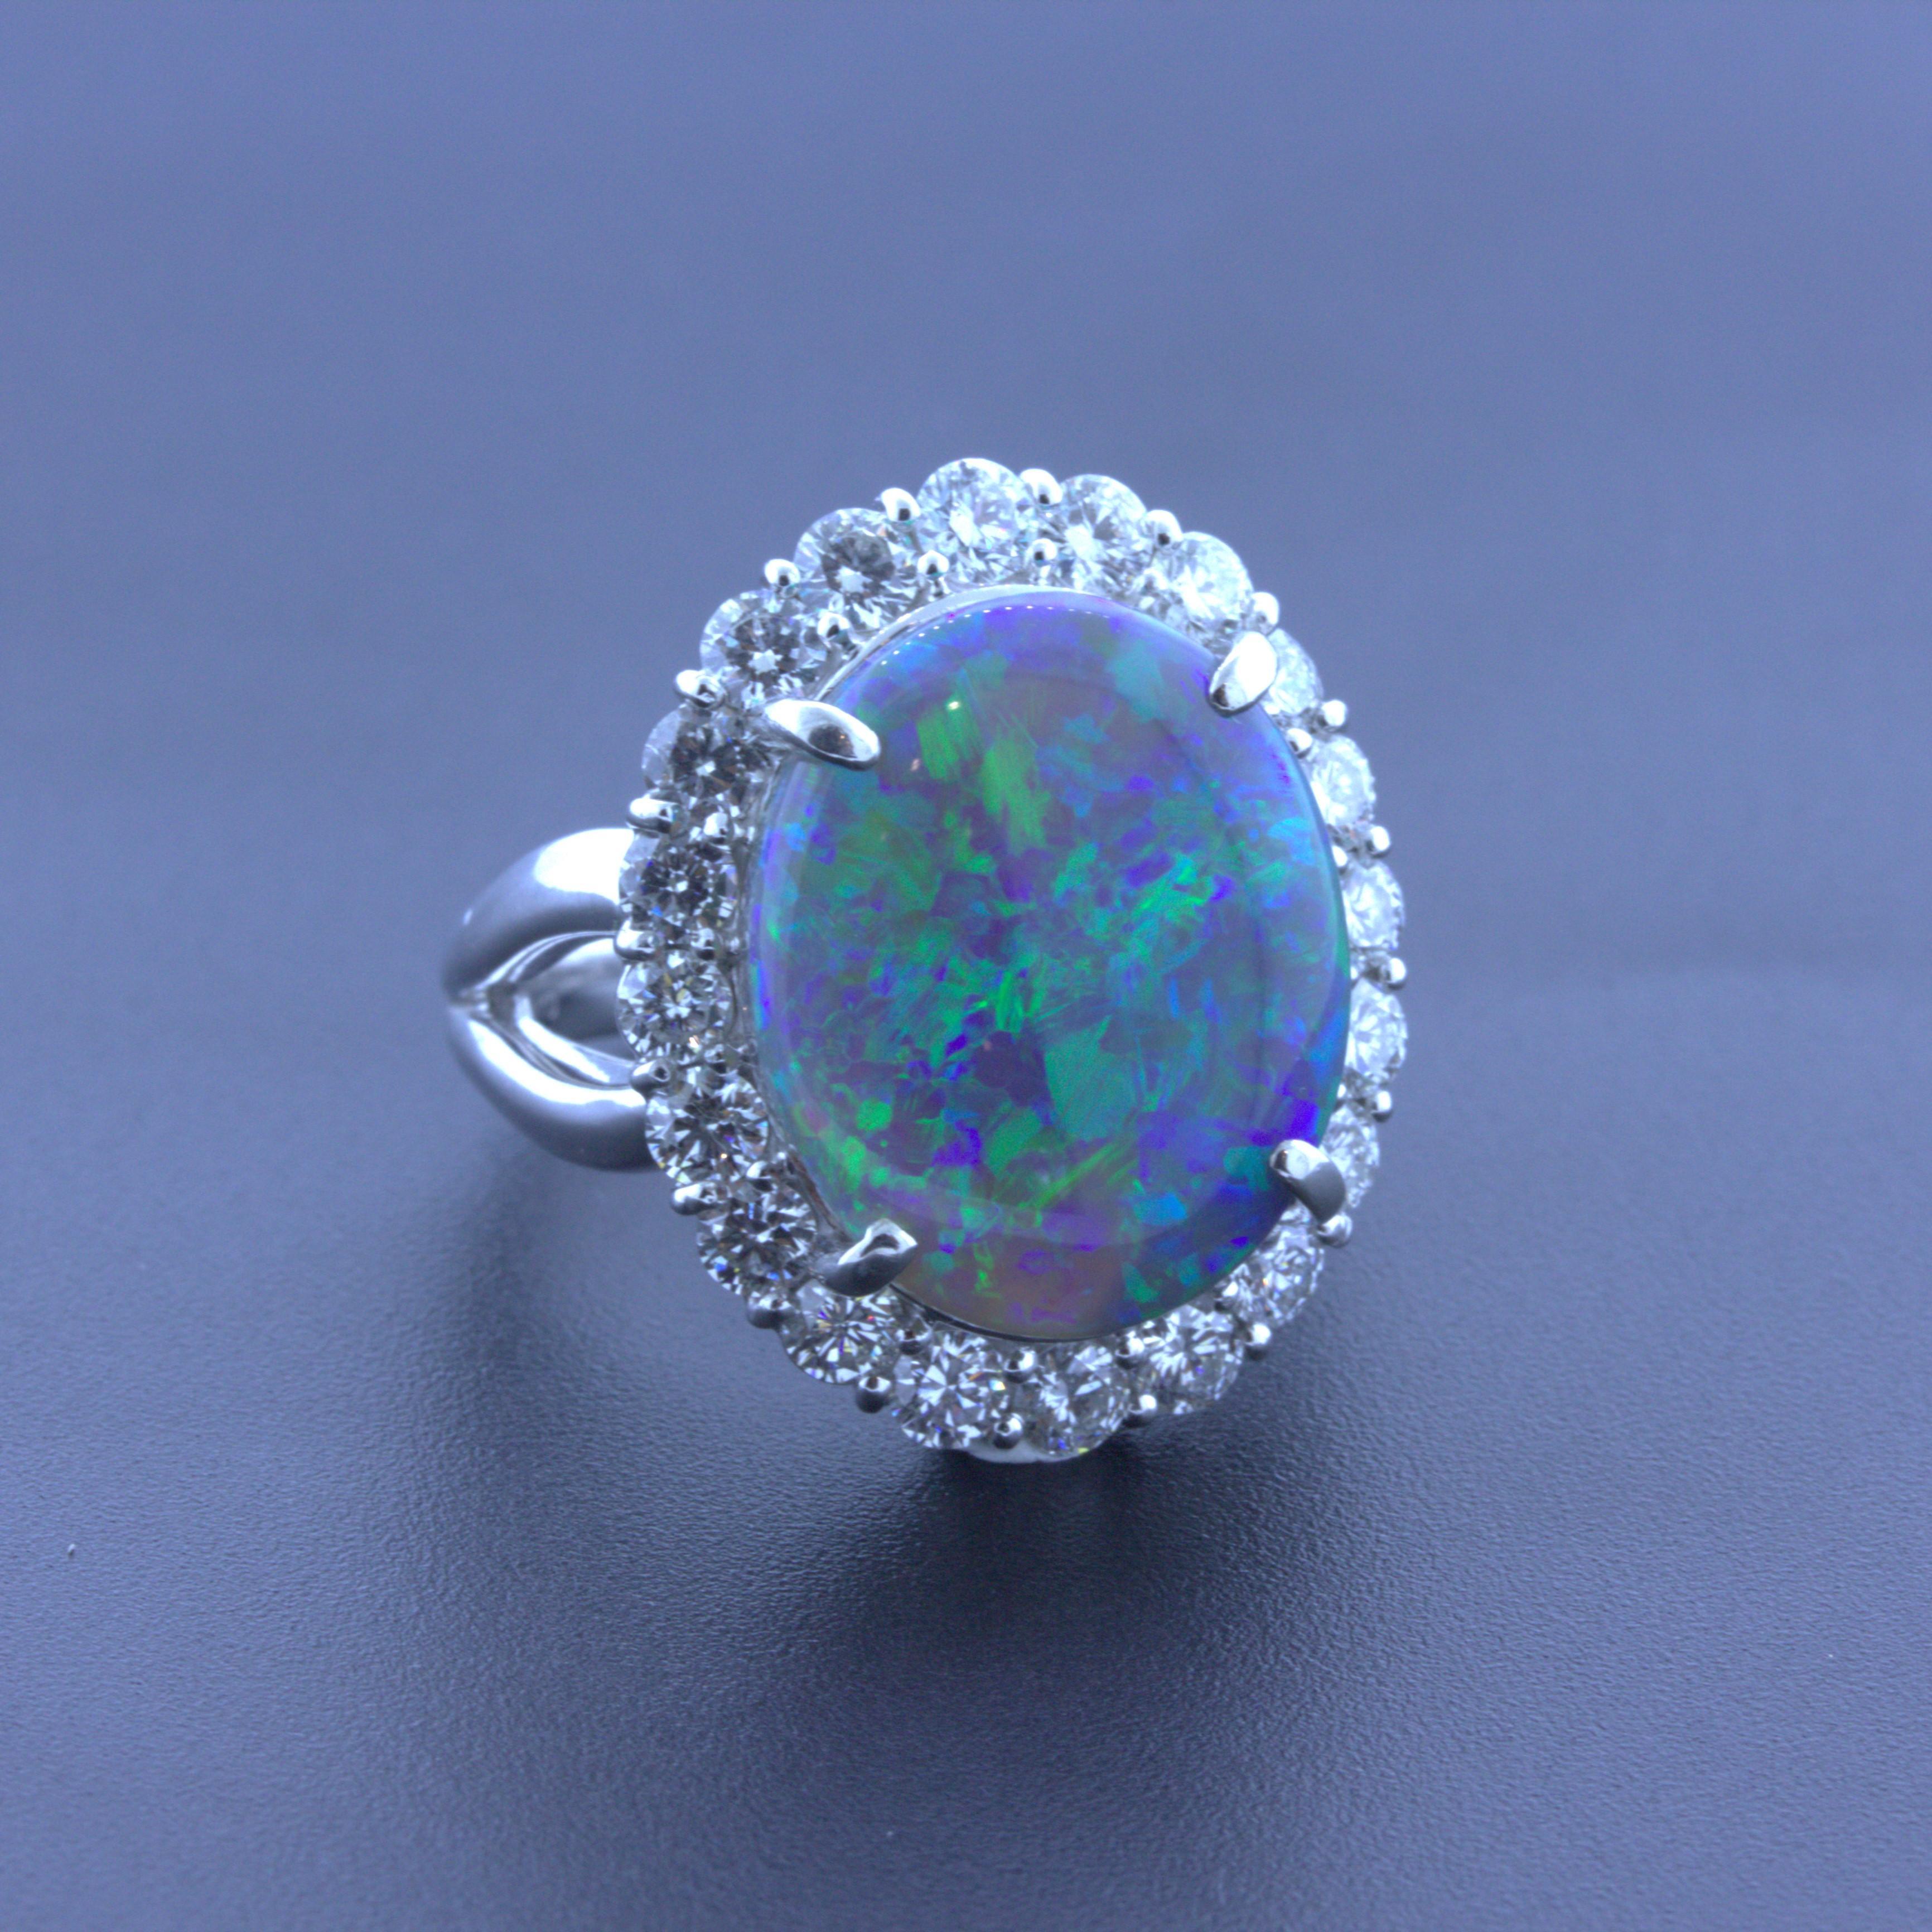 A very special and important opal takes center stage of this platinum ring. It weighs an impressive 10.18 carats and has excellent play-of-color as bright vibrant flashes of blue, green, violet, and red dance across the stone. The colors flash over